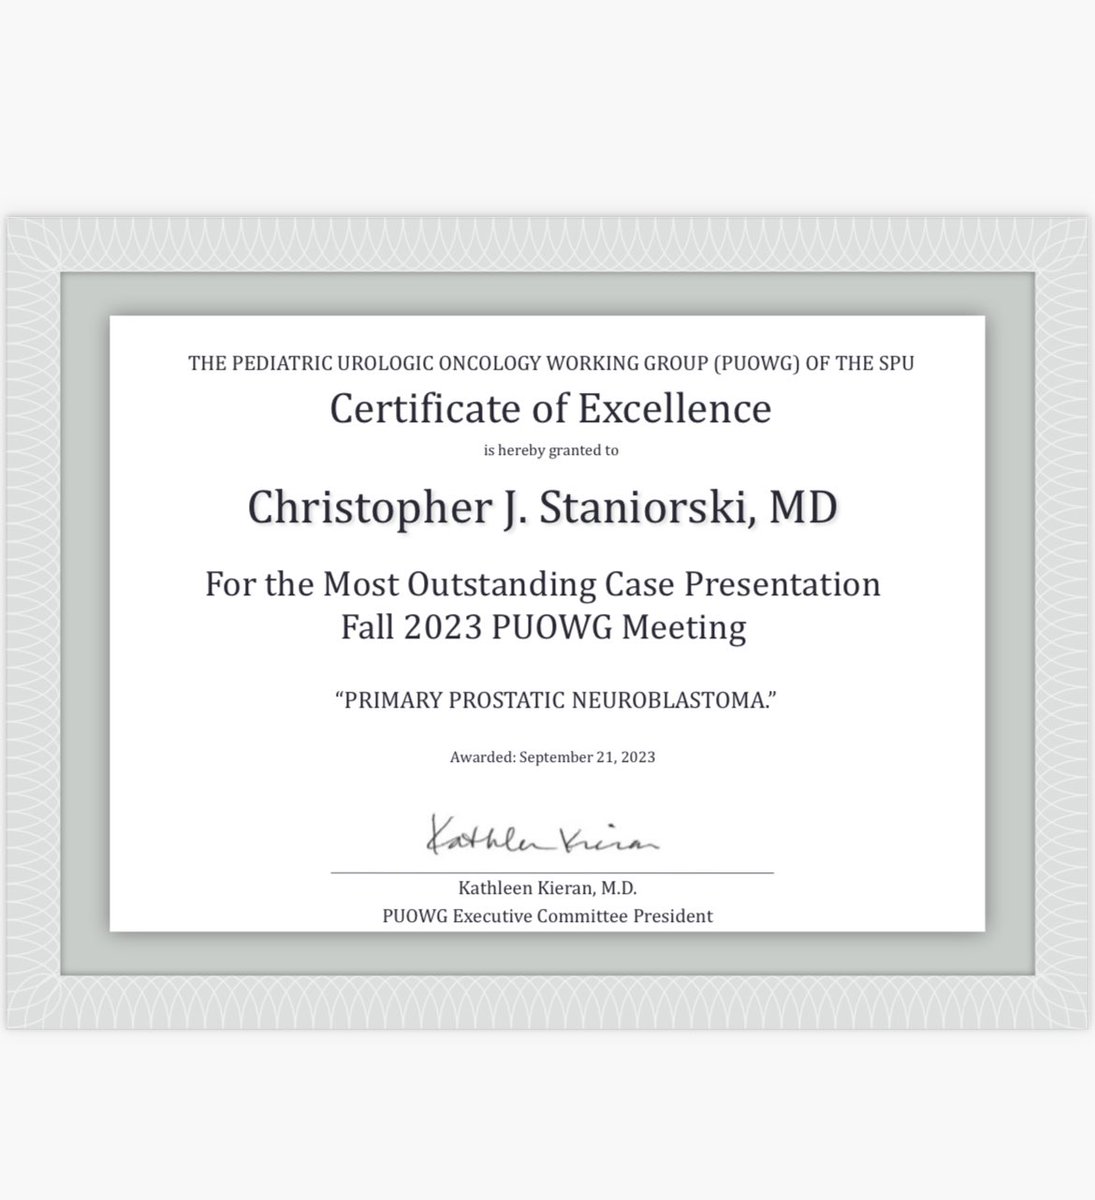 Congrats to @CStaniorski for his award on “Most Outstanding Presentation” for Fall 2023 PUOWG Meeting! @SPU_Urology @upmcpedsurology .